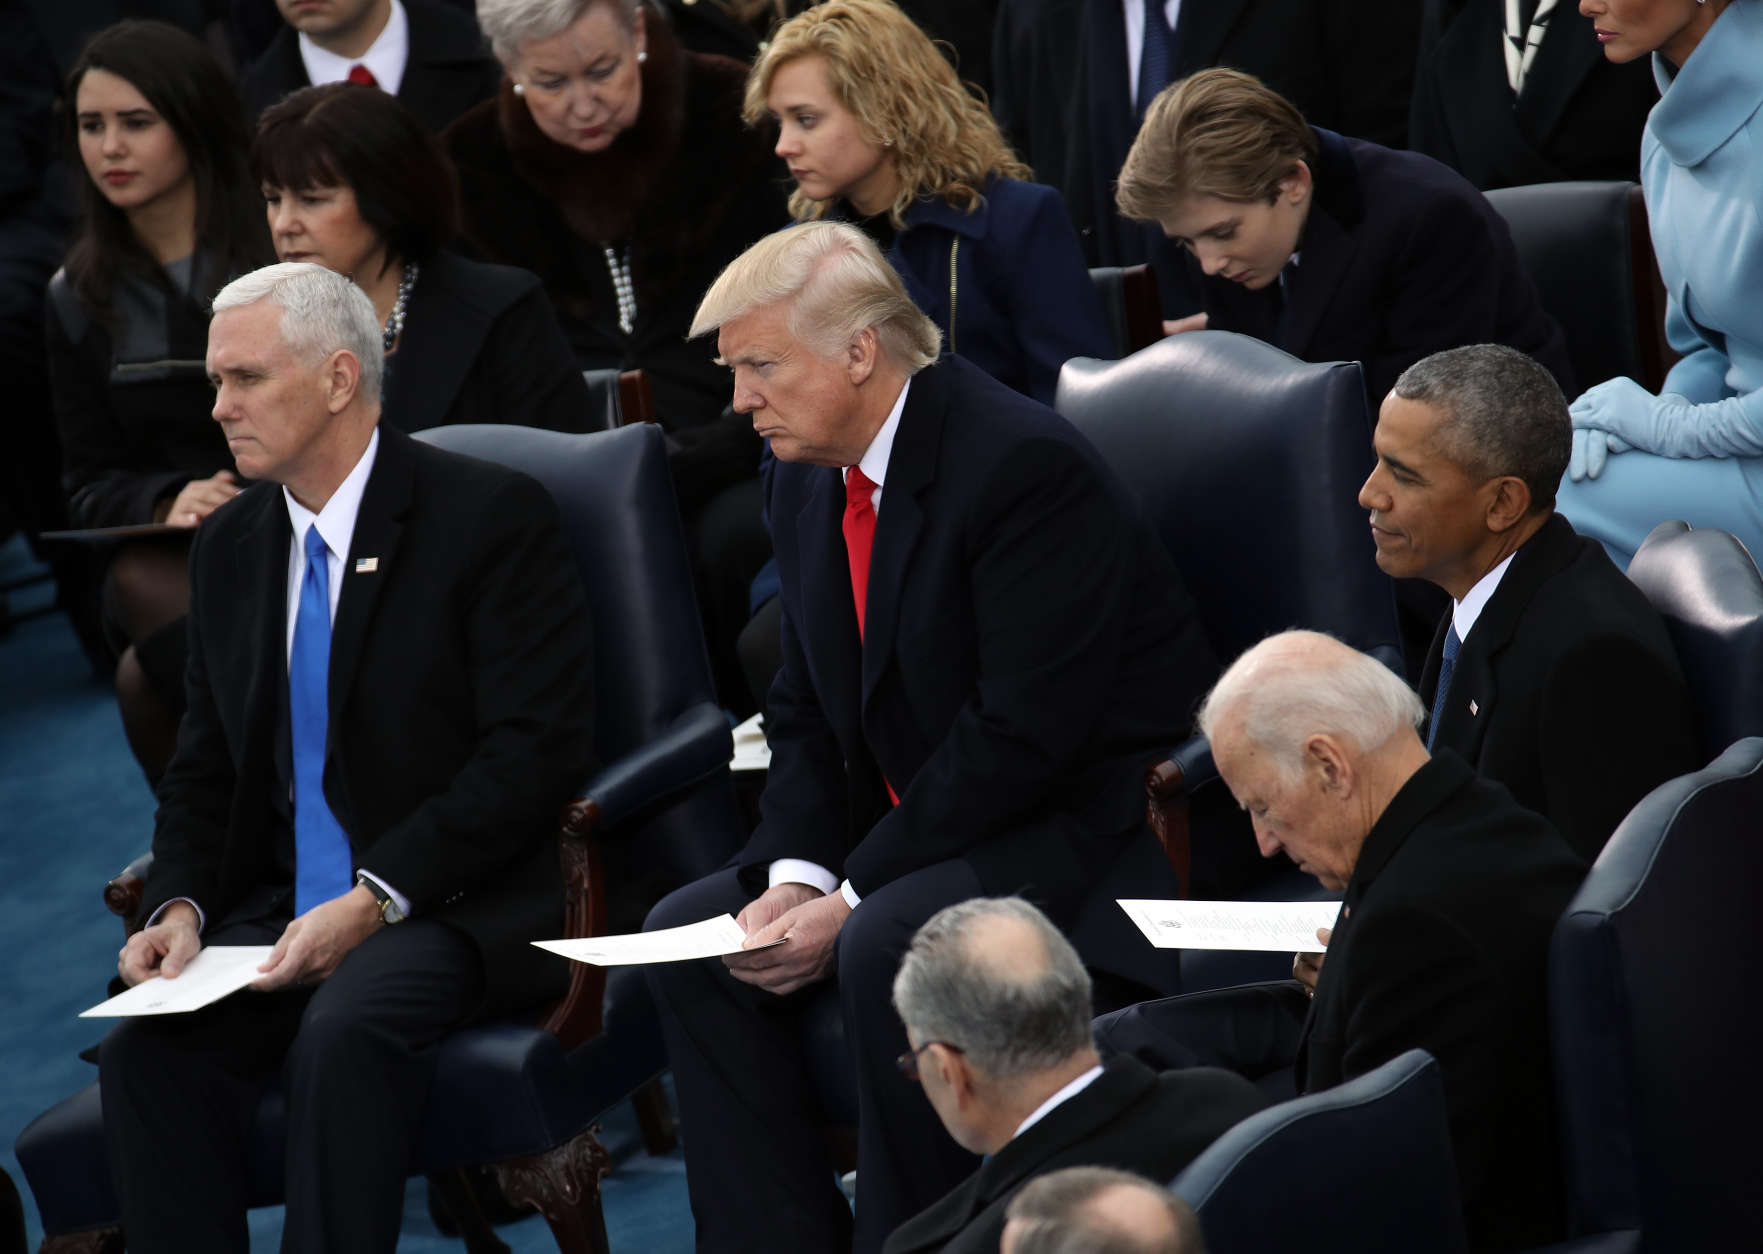 WASHINGTON, DC - JANUARY 20:  (L-R) U.S. Vice President-elect Mike Pence, President-elect Donald Trump, Vice President Joe Biden, Barron Trump and President Barack Obama take their seats on the West Front of the U.S. Capitol on January 20, 2017 in Washington, DC. In today's inauguration ceremony Donald J. Trump becomes the 45th president of the United States.  (Photo by Drew Angerer/Getty Images)